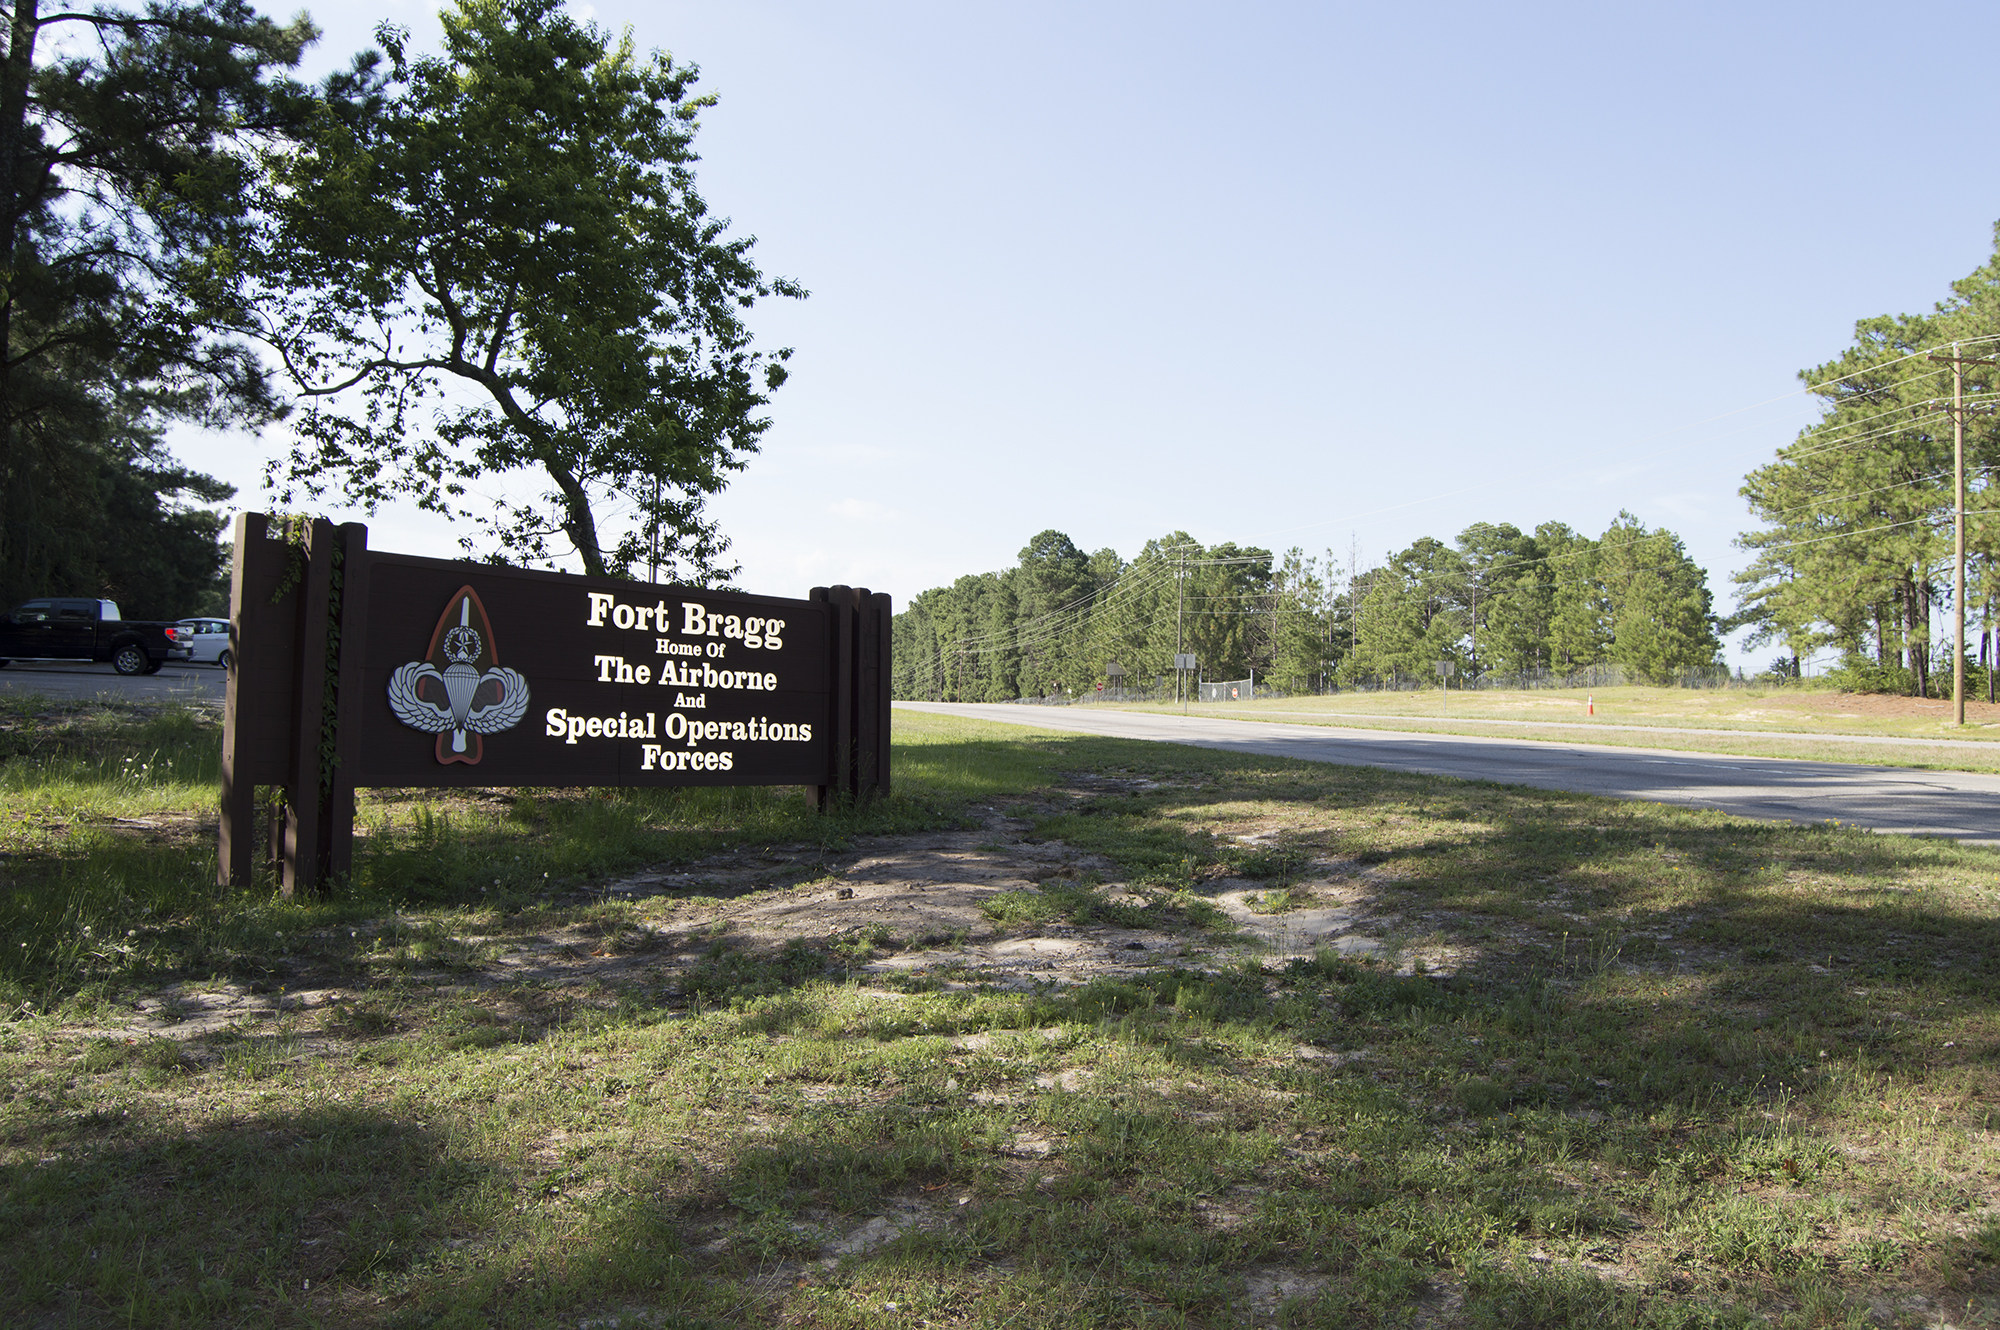 The entrance to Fort Bragg is just outside Fayetteville, North Carolina, and is among the largest in the United States. (Michael Olinger/News21)